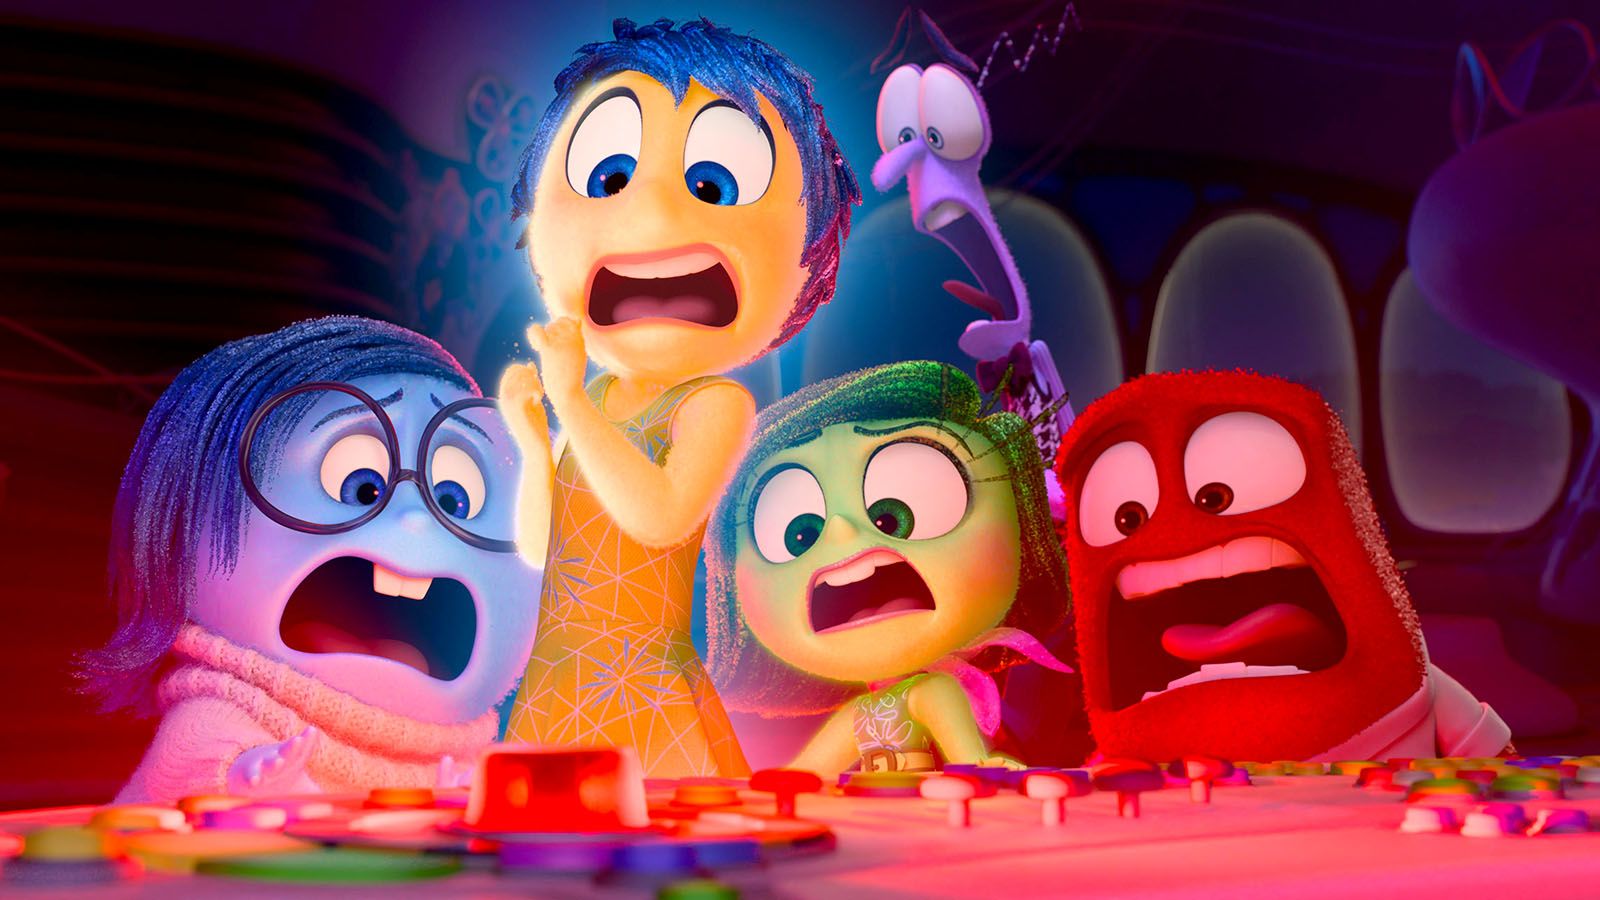 The original emotions from Inside Out are joined by some new ones in Inside Out 2.